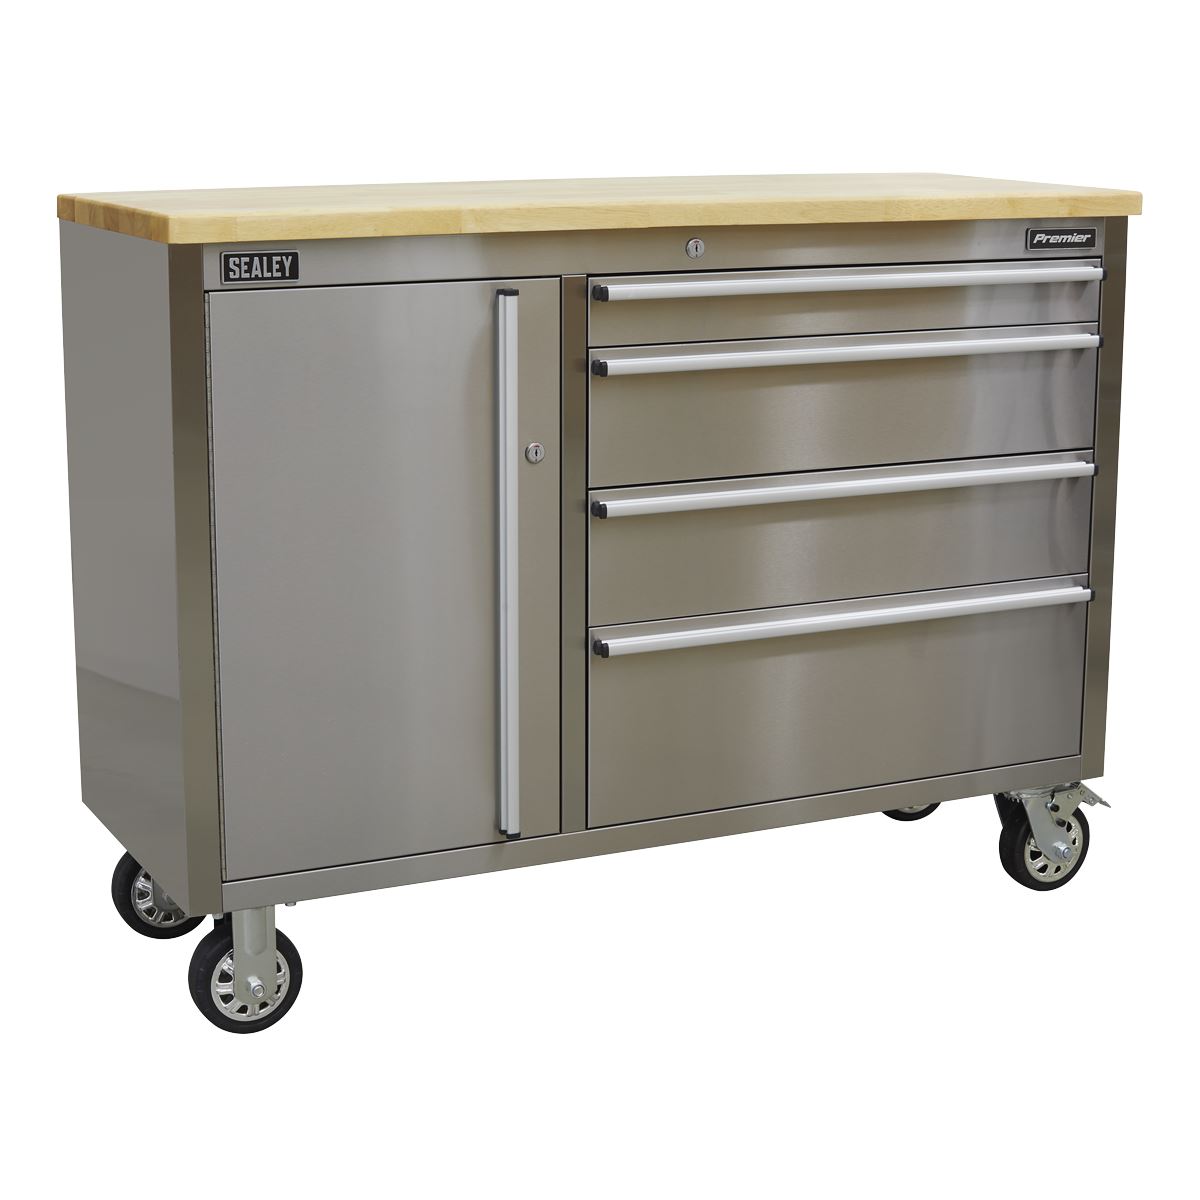 Sealey Premier Mobile Stainless Steel Tool Cabinet 4 Drawer